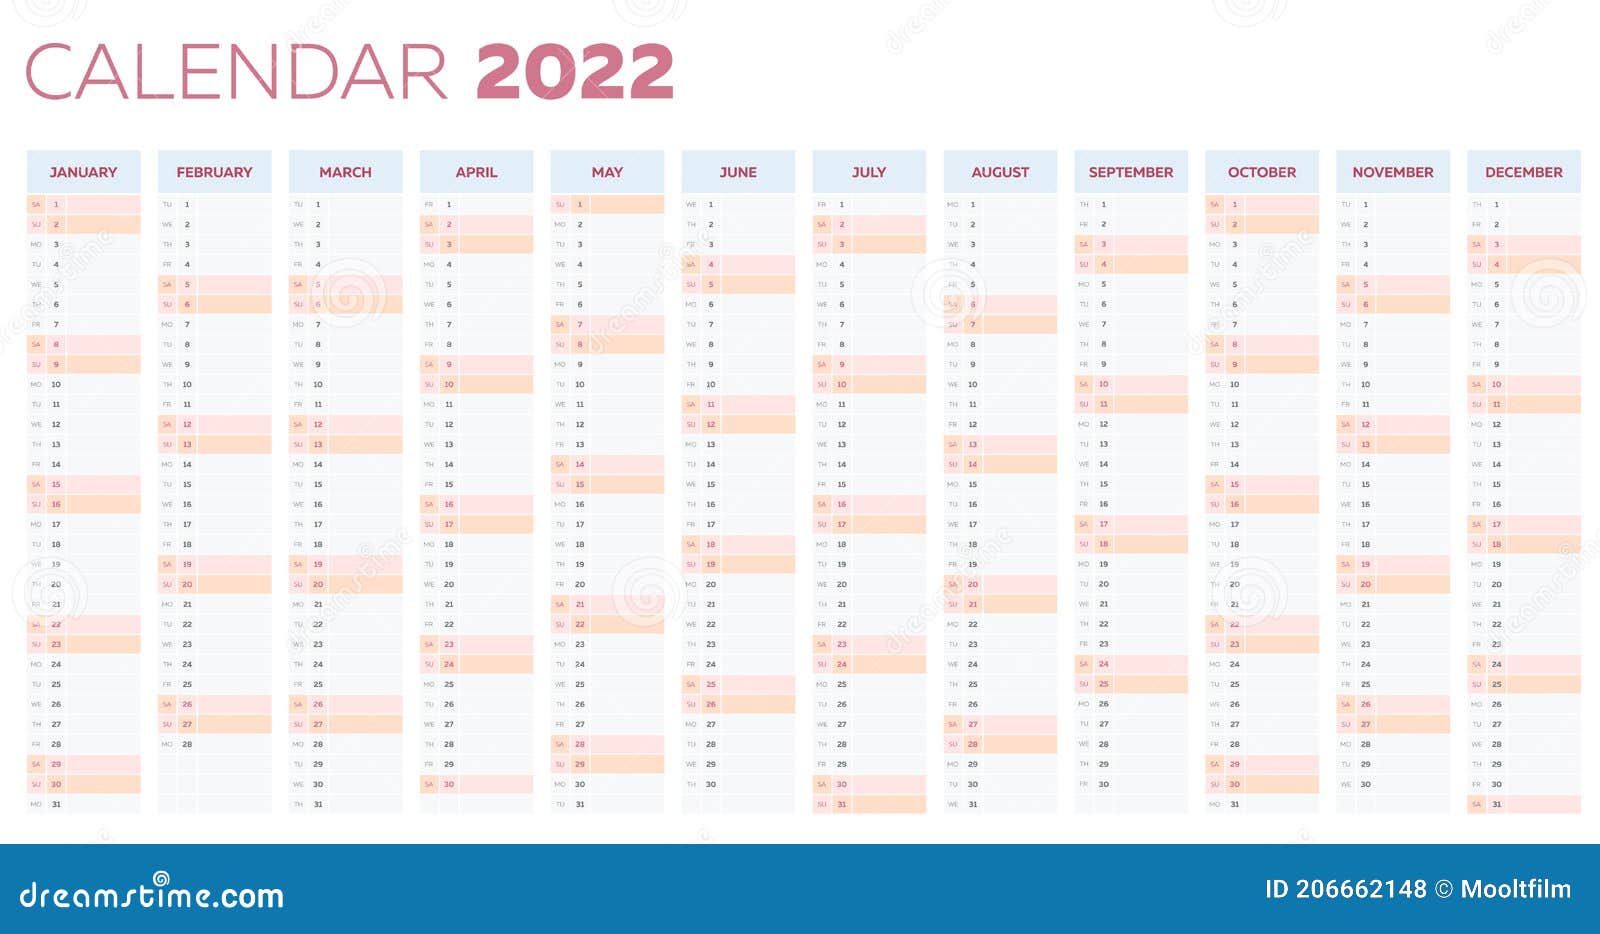 Editable Calendar 2022 The 2022 Calendar Planner Template With Vertical Monthly Columns Stock  Illustration - Illustration Of Control, Future: 206662148